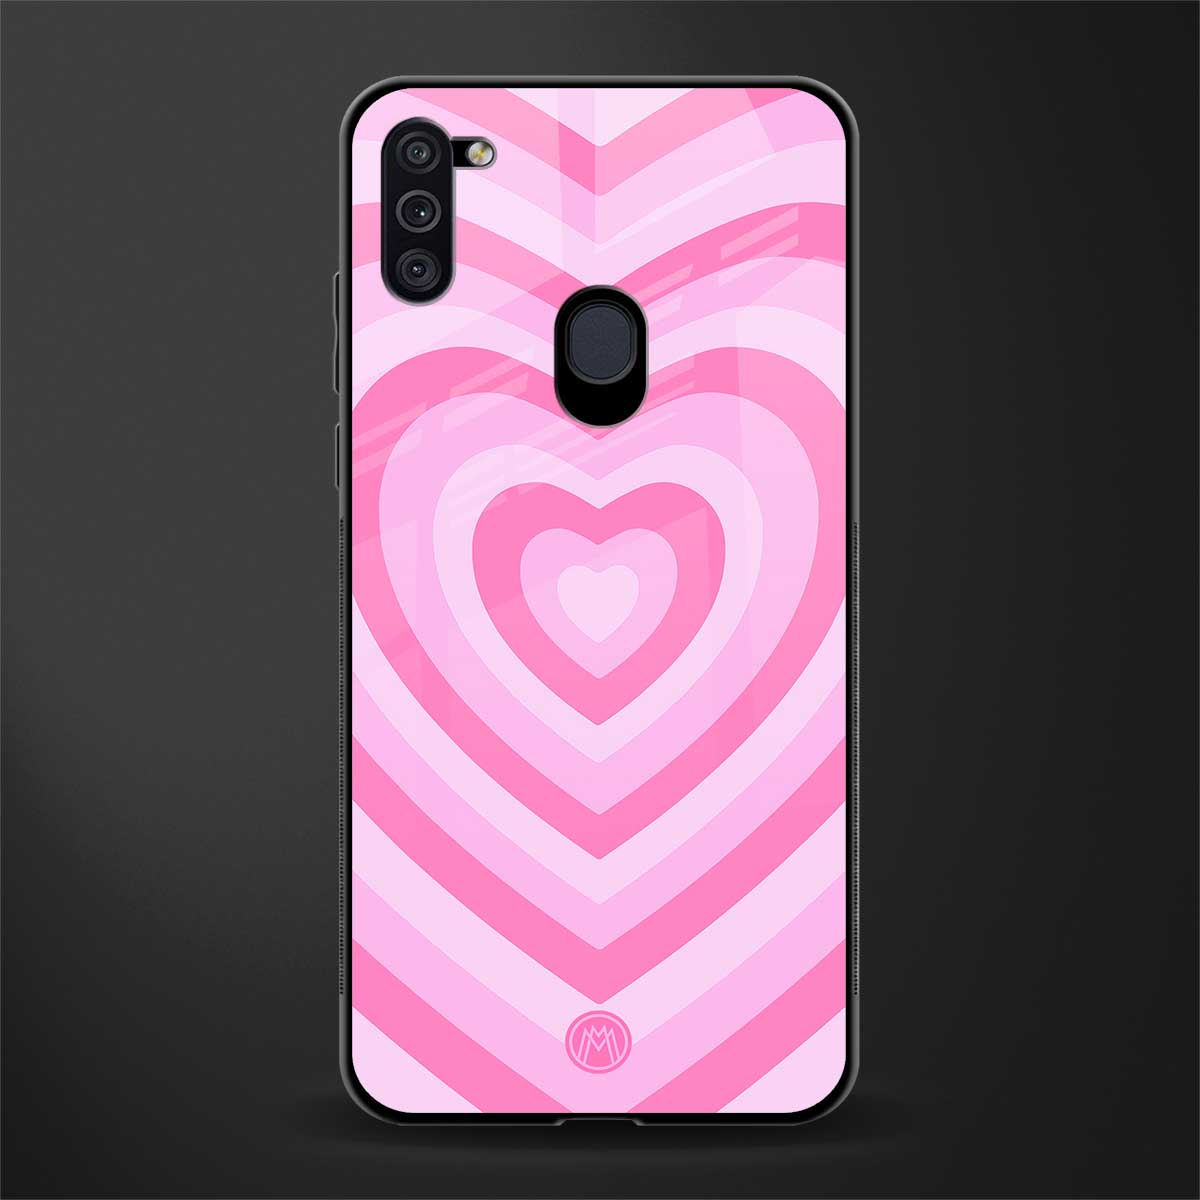 y2k pink hearts aesthetic glass case for samsung a11 image